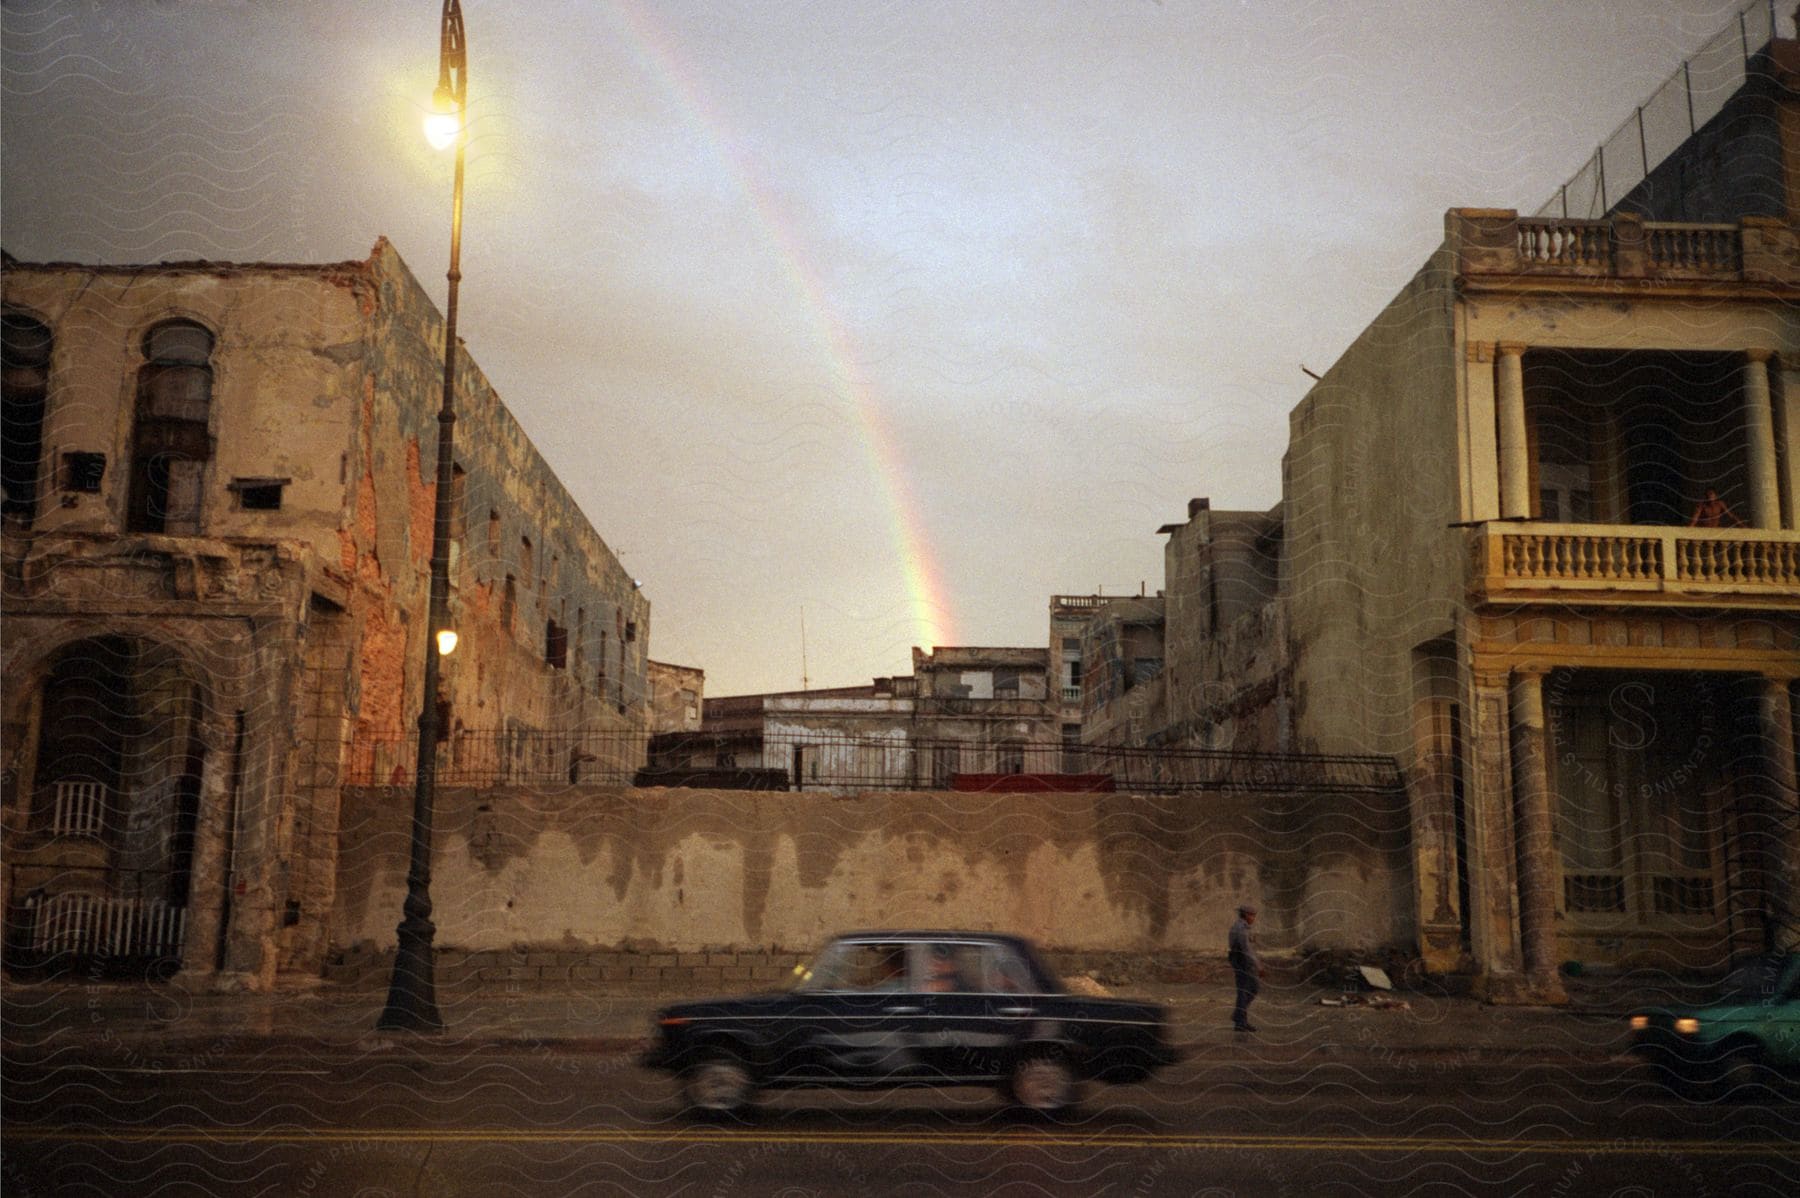 A black car drives down a street passing old buildings as a rainbow appears in the background